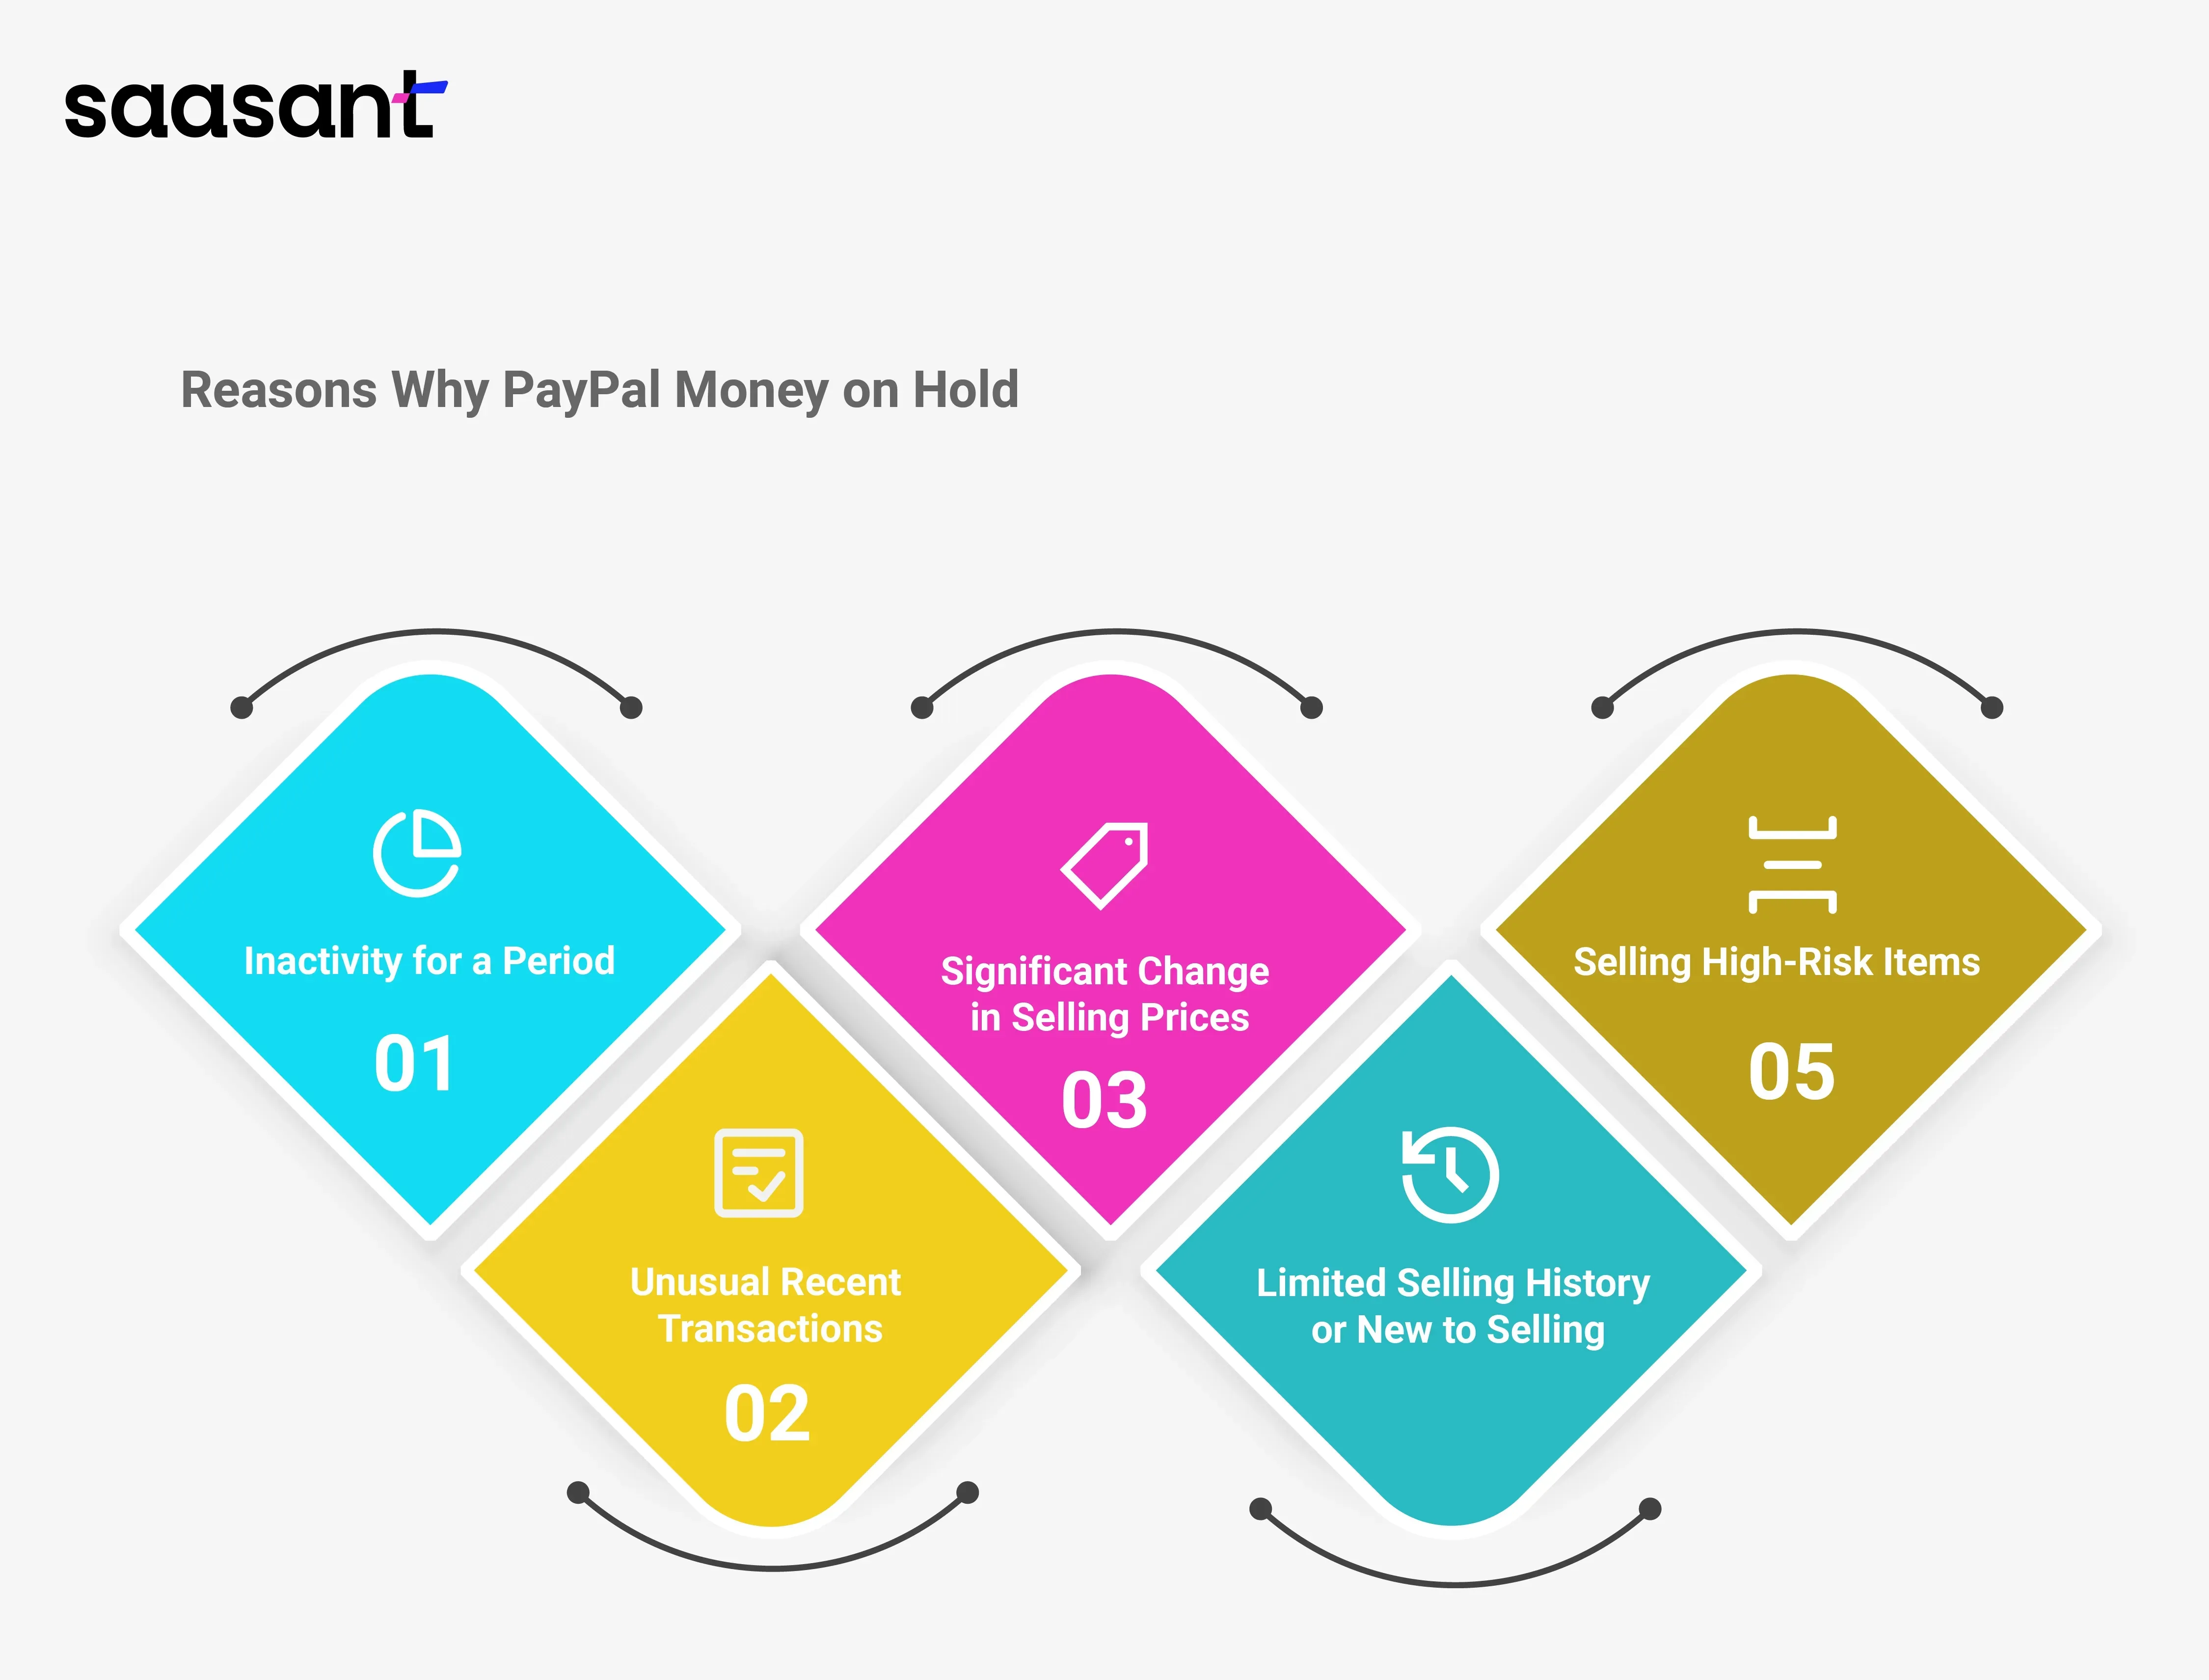 Reasons Why PayPal Money on Hold